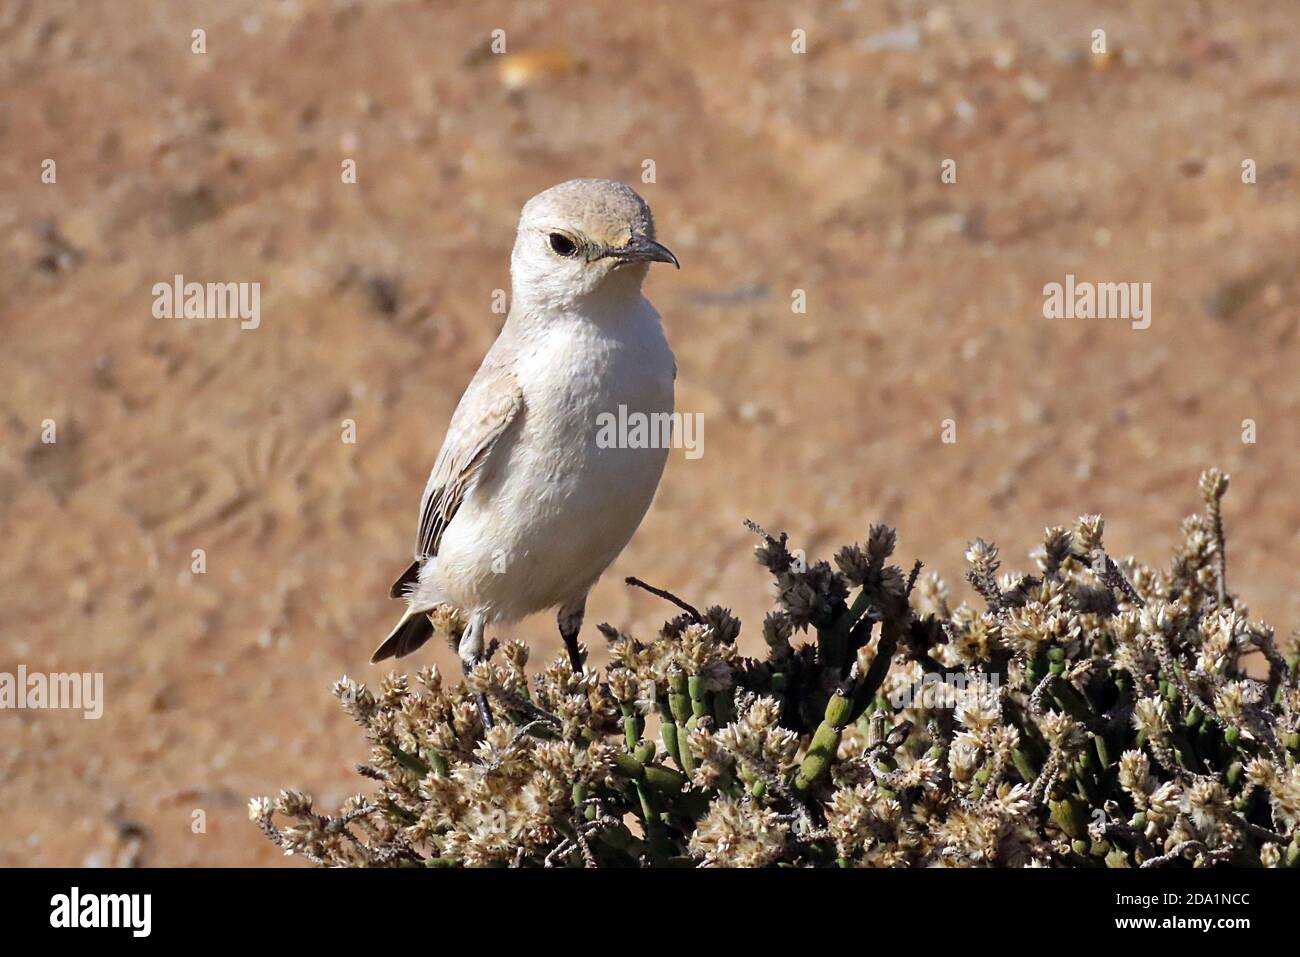 A Tractrac Chat (Emarginata tractrac) perched on foliage in the Dorob desert outside Swakopmund, Namibia. Stock Photo